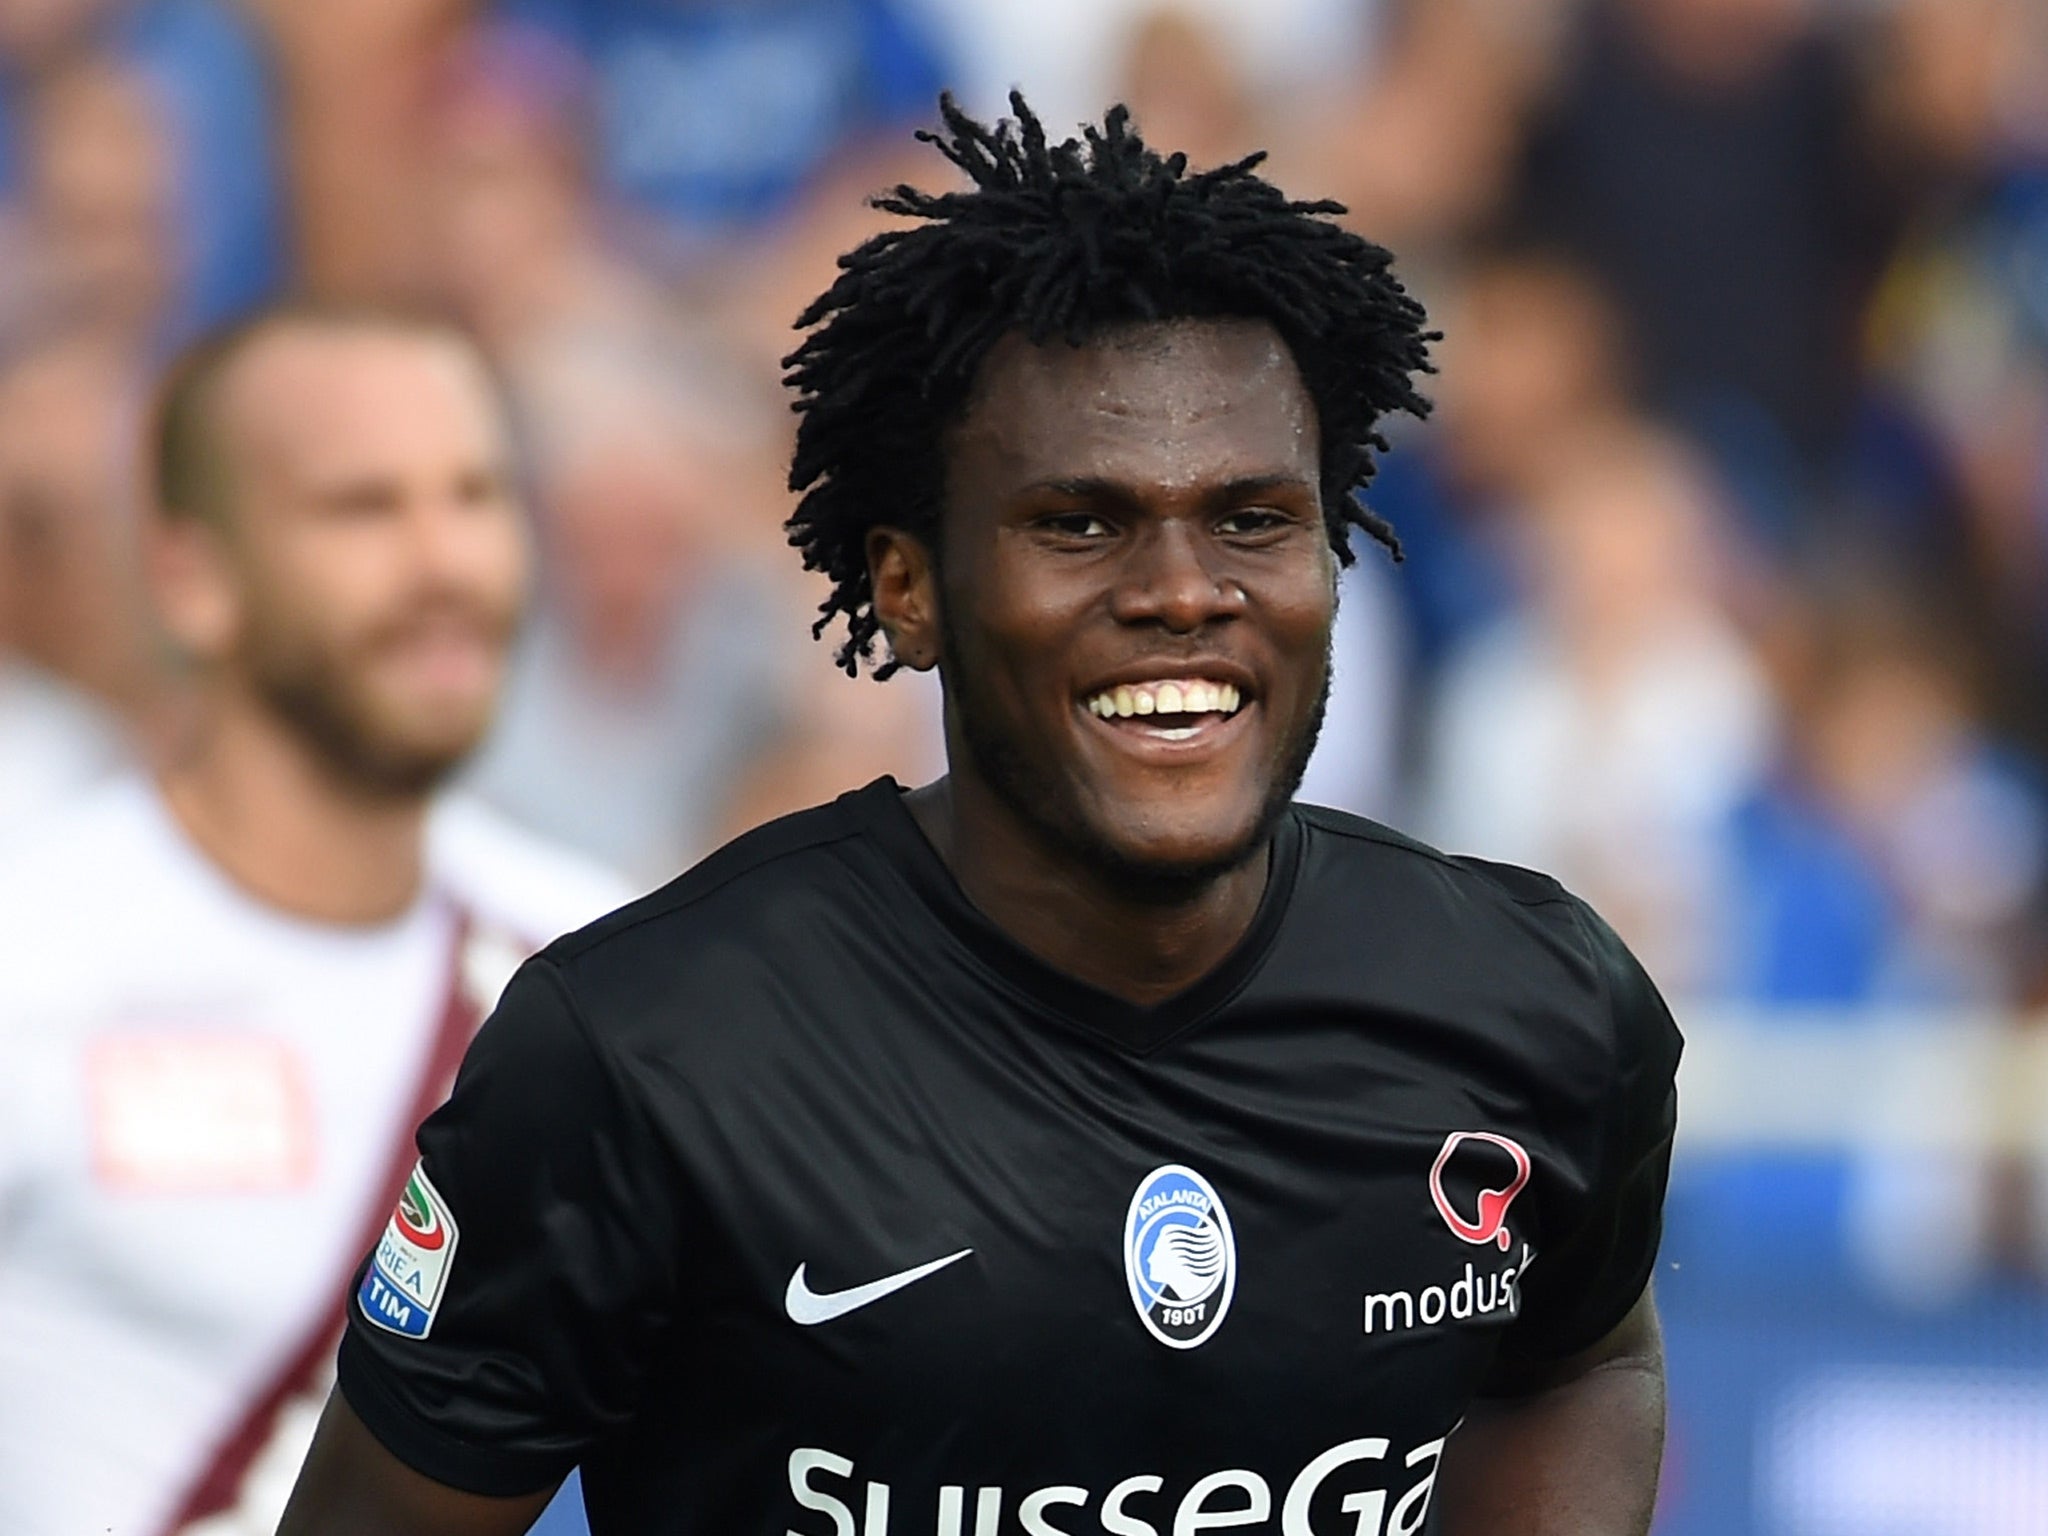 Kessie has impressed while playing for Atalanta in Serie A